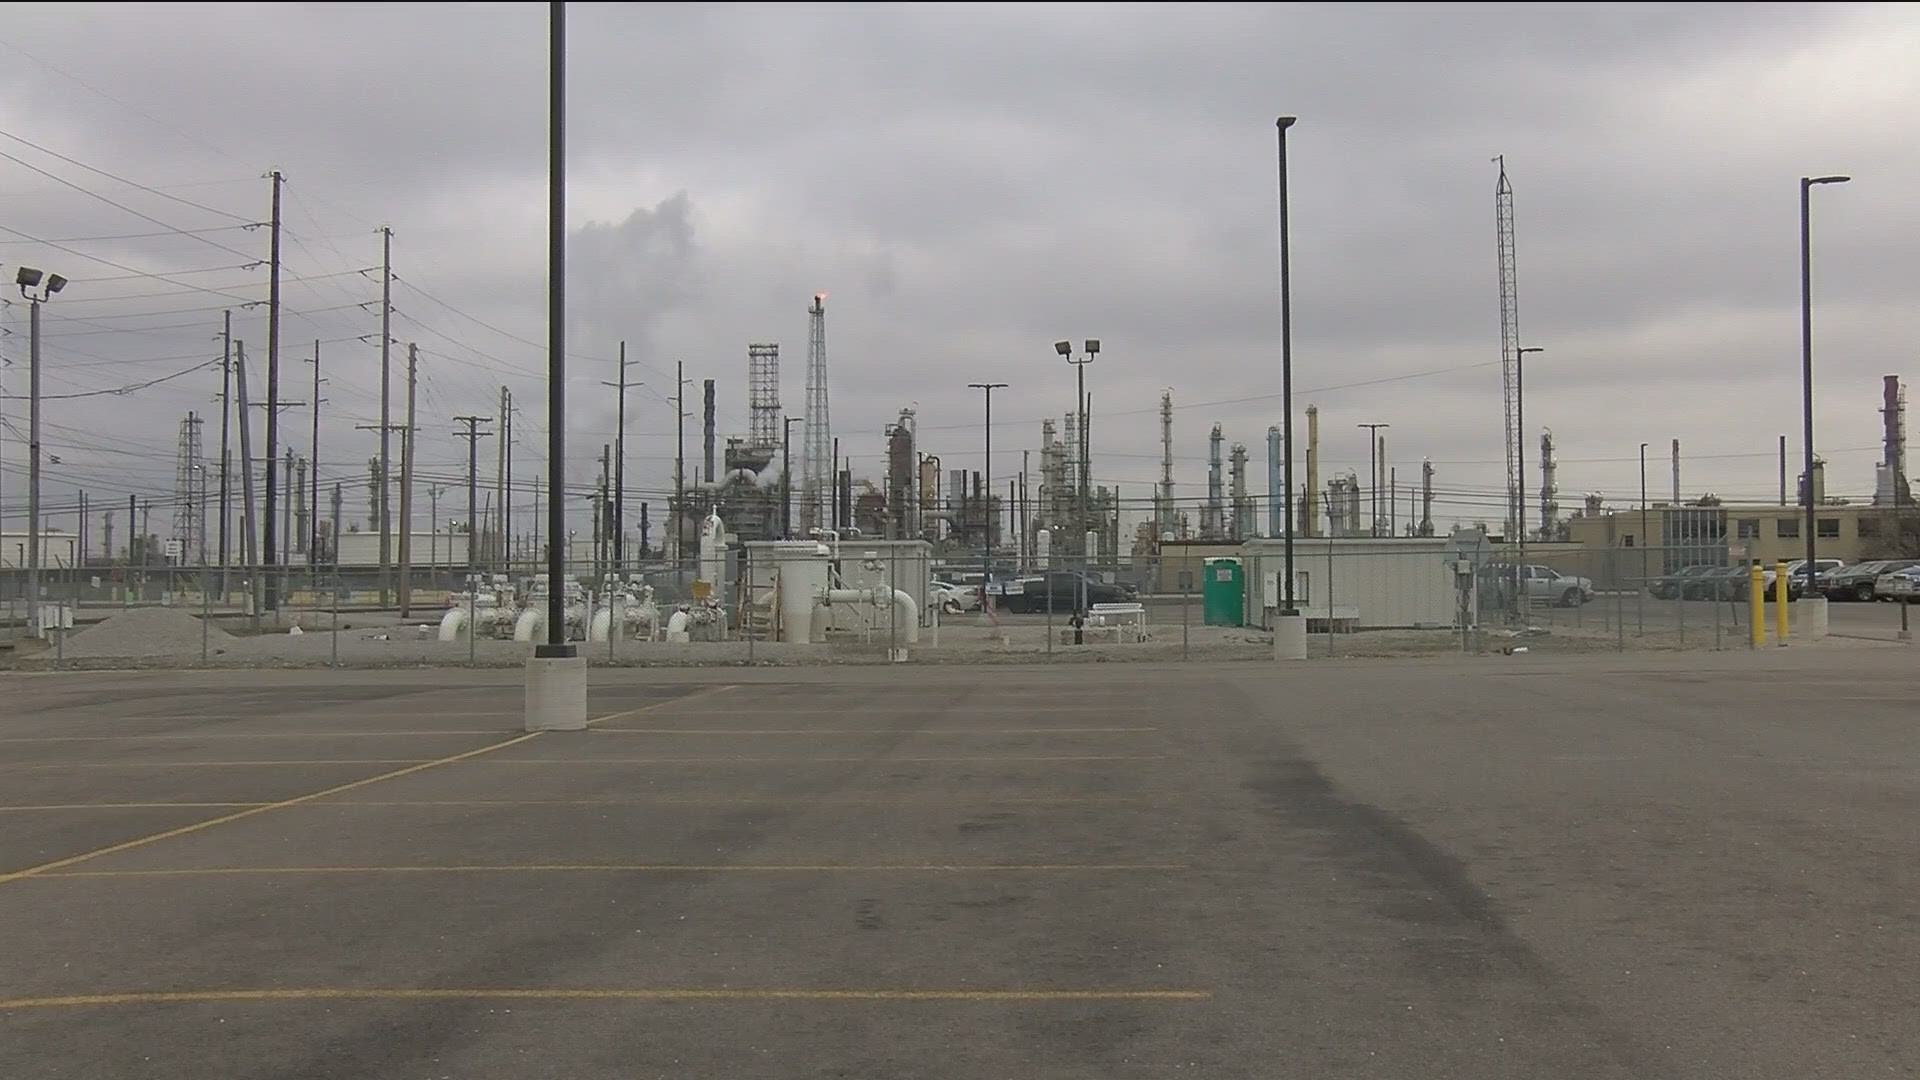 According to Cenovus, multiple units at the refinery are now open as part of a phased reopening plan expected to finish in May.